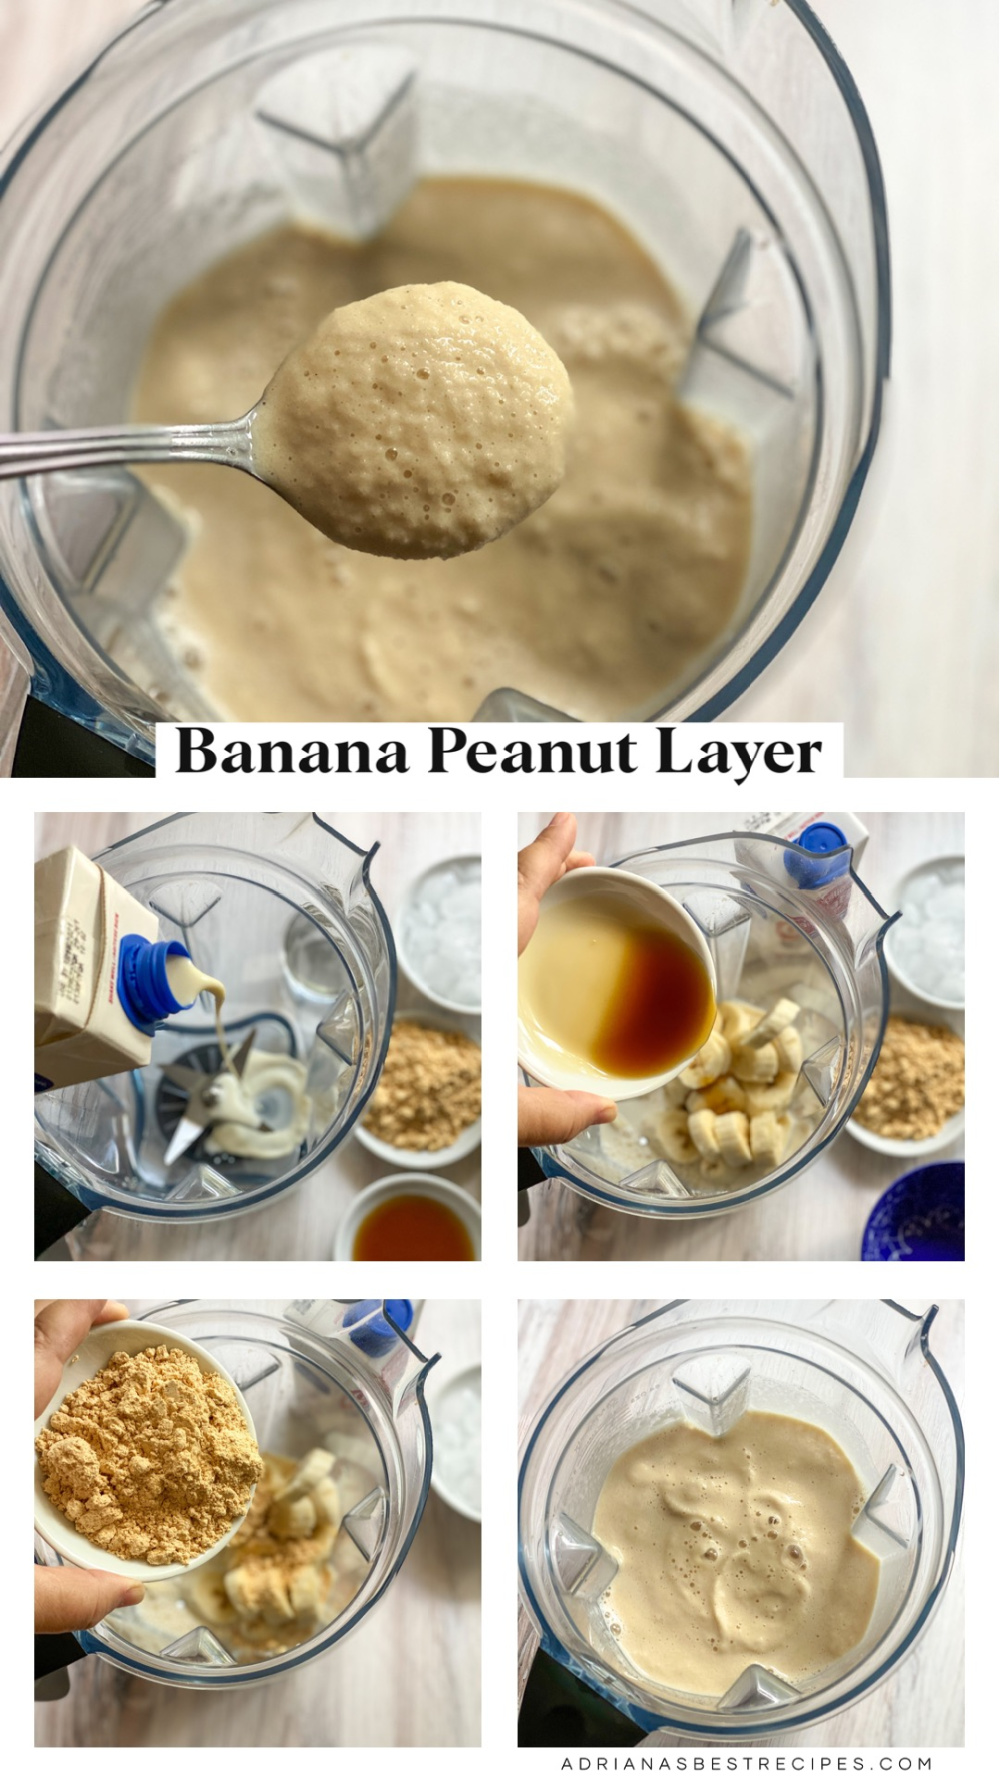 A collage with pictures showing the process on how to make the banana peanut layer for the smoothie